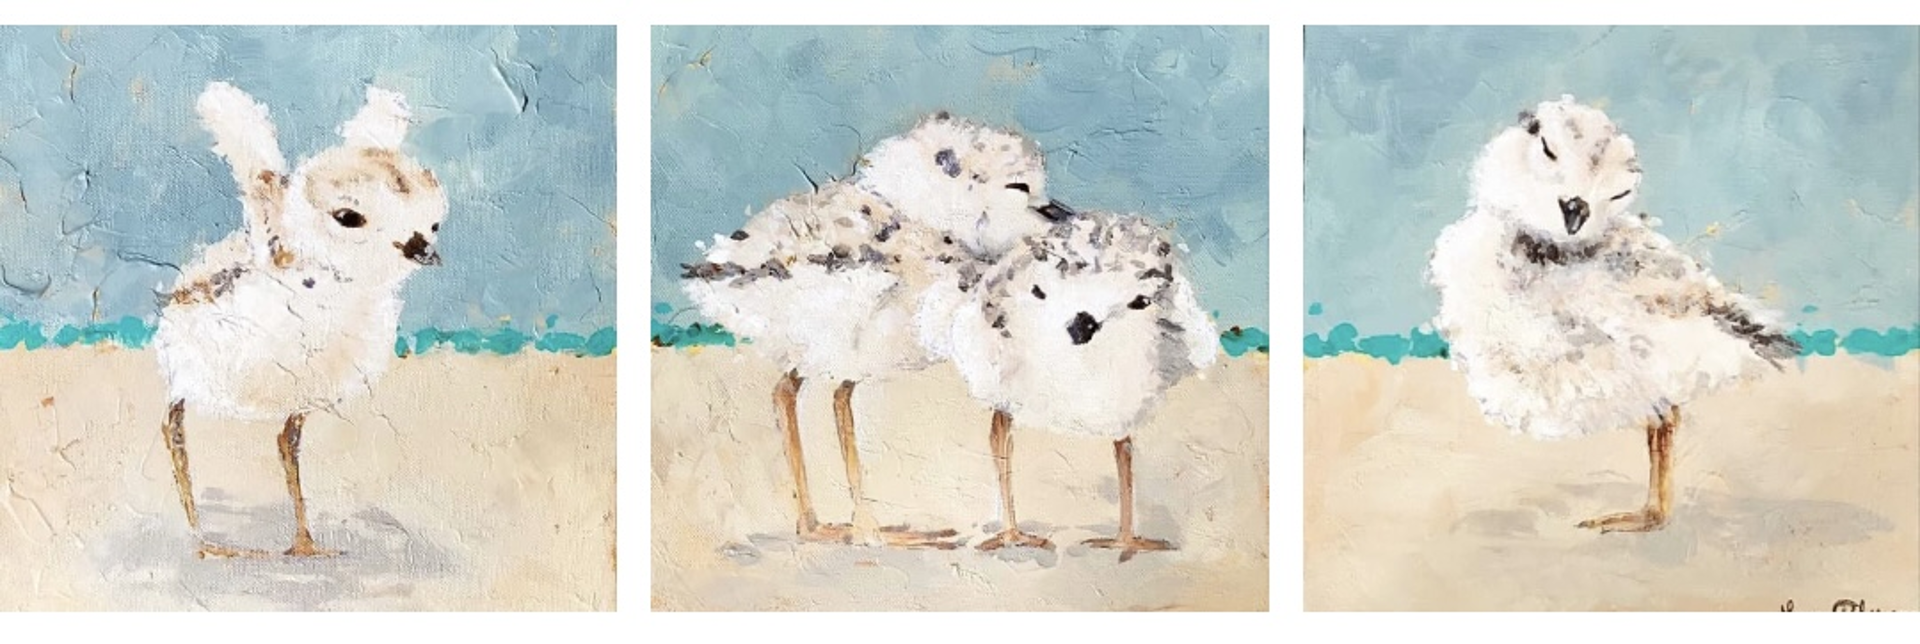 Piping Plover on Teal; 1 of 3 by Laura Palermo - Giclee Prints